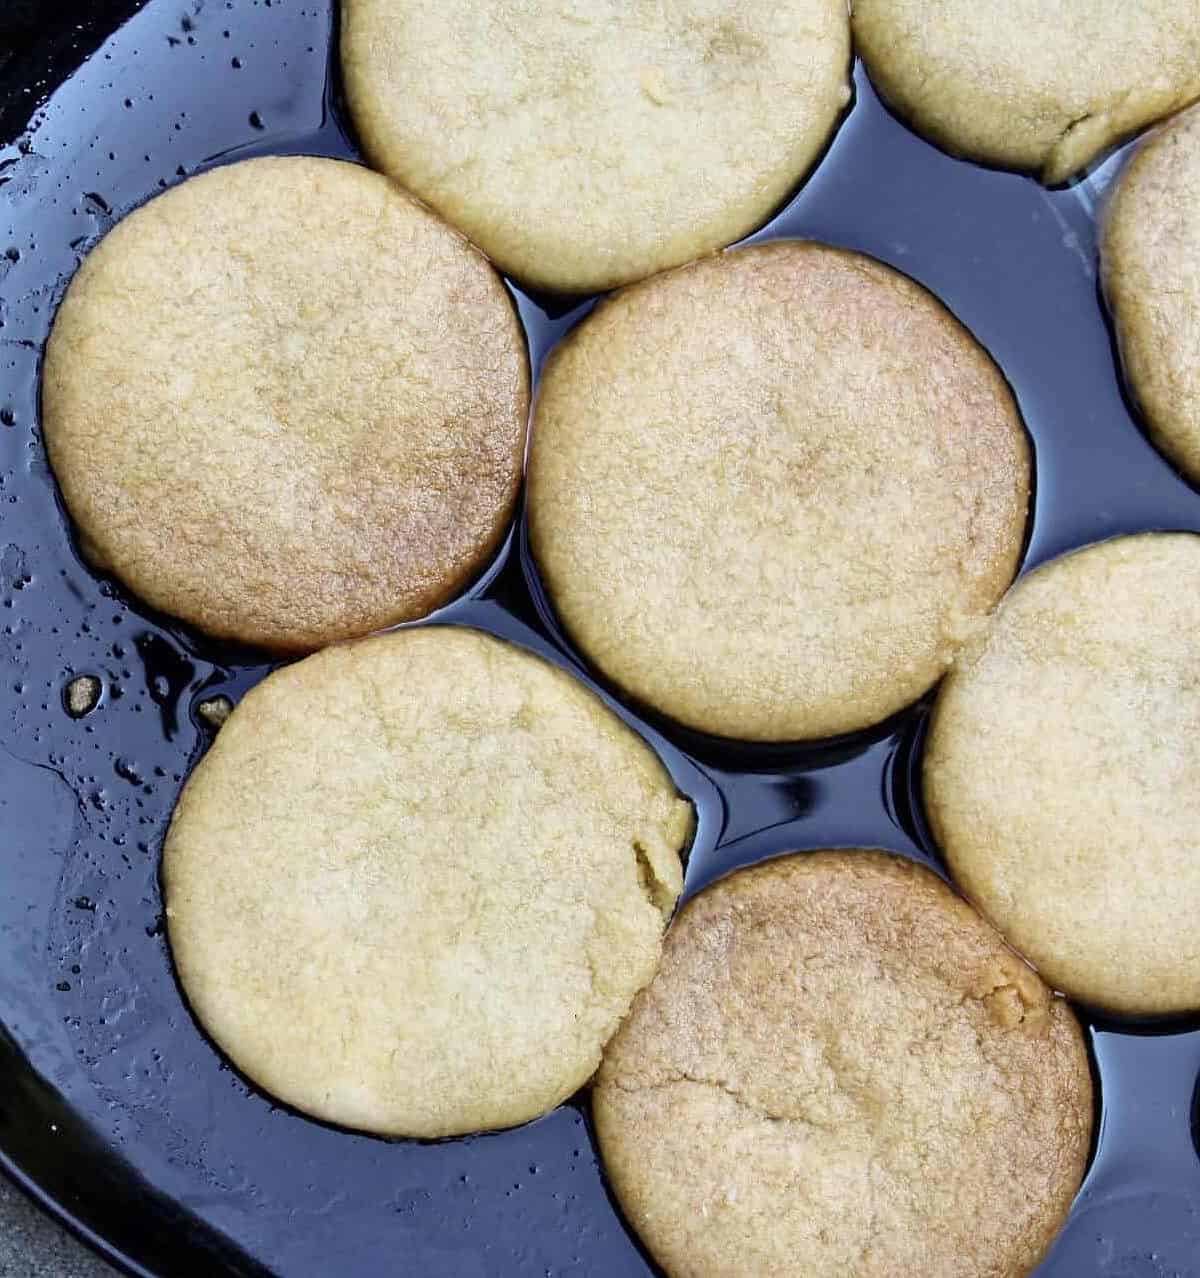 Sheqerpare (Cookies in Syrup)